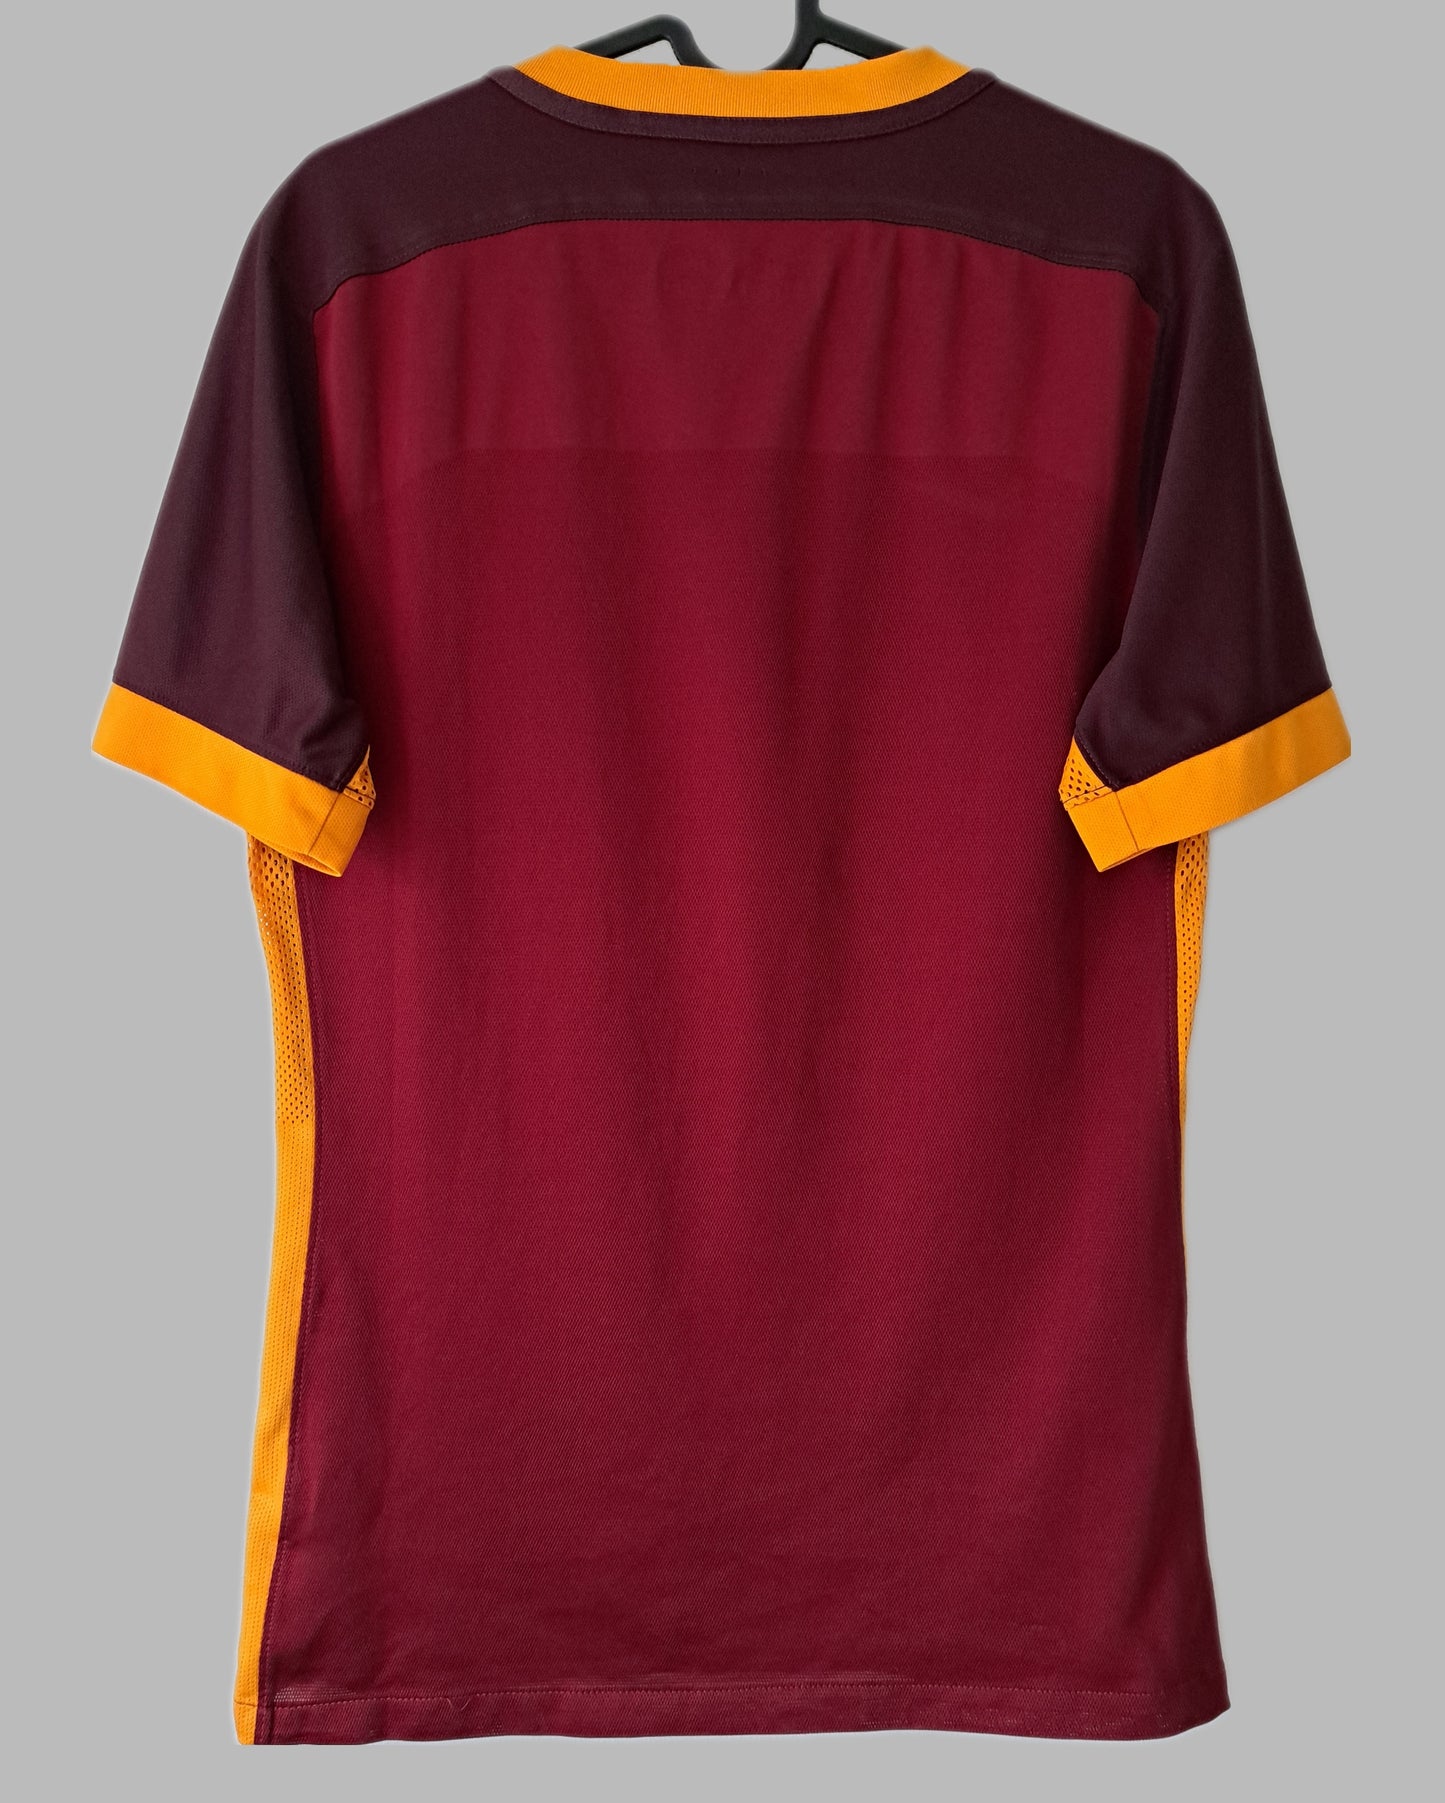 AS Roma 2015-16 Home Shirt "Player Issue"